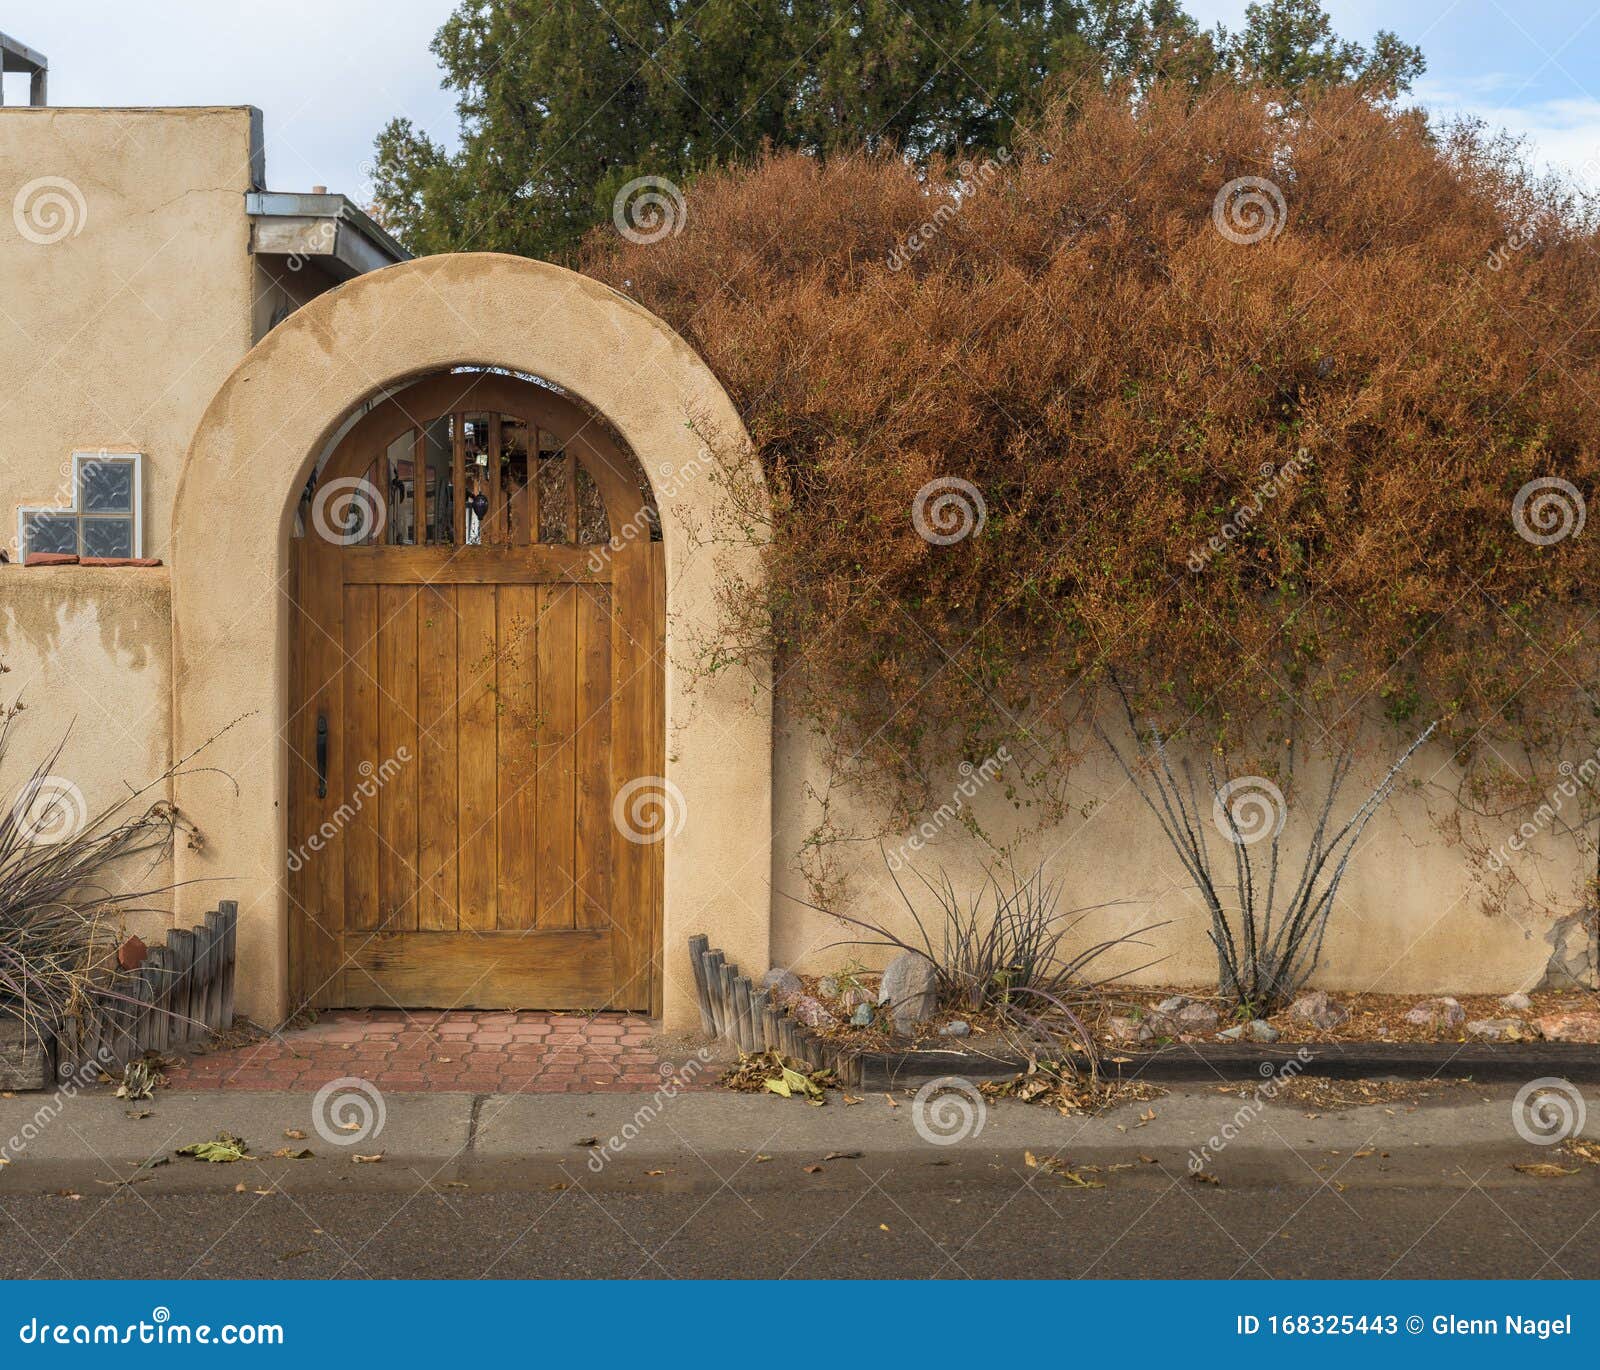 arched doorway in historic mesilla, new mexico